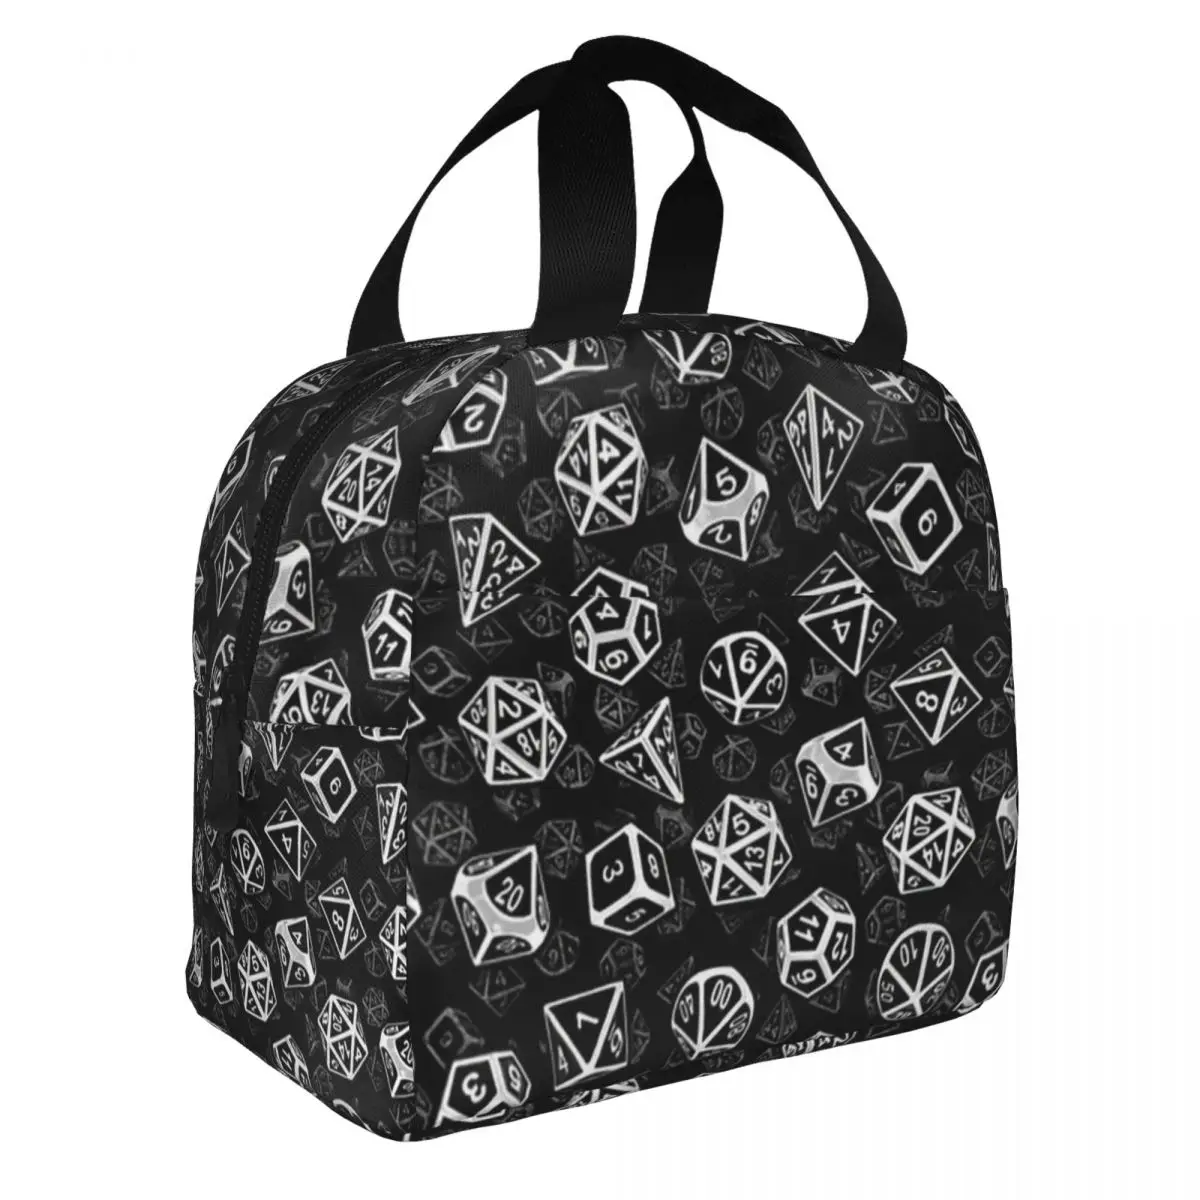 D20 Dice Set Pattern (White) Lunch Bento Bags Portable Aluminum Foil thickened Thermal Cloth Lunch Bag for Women Men Boy